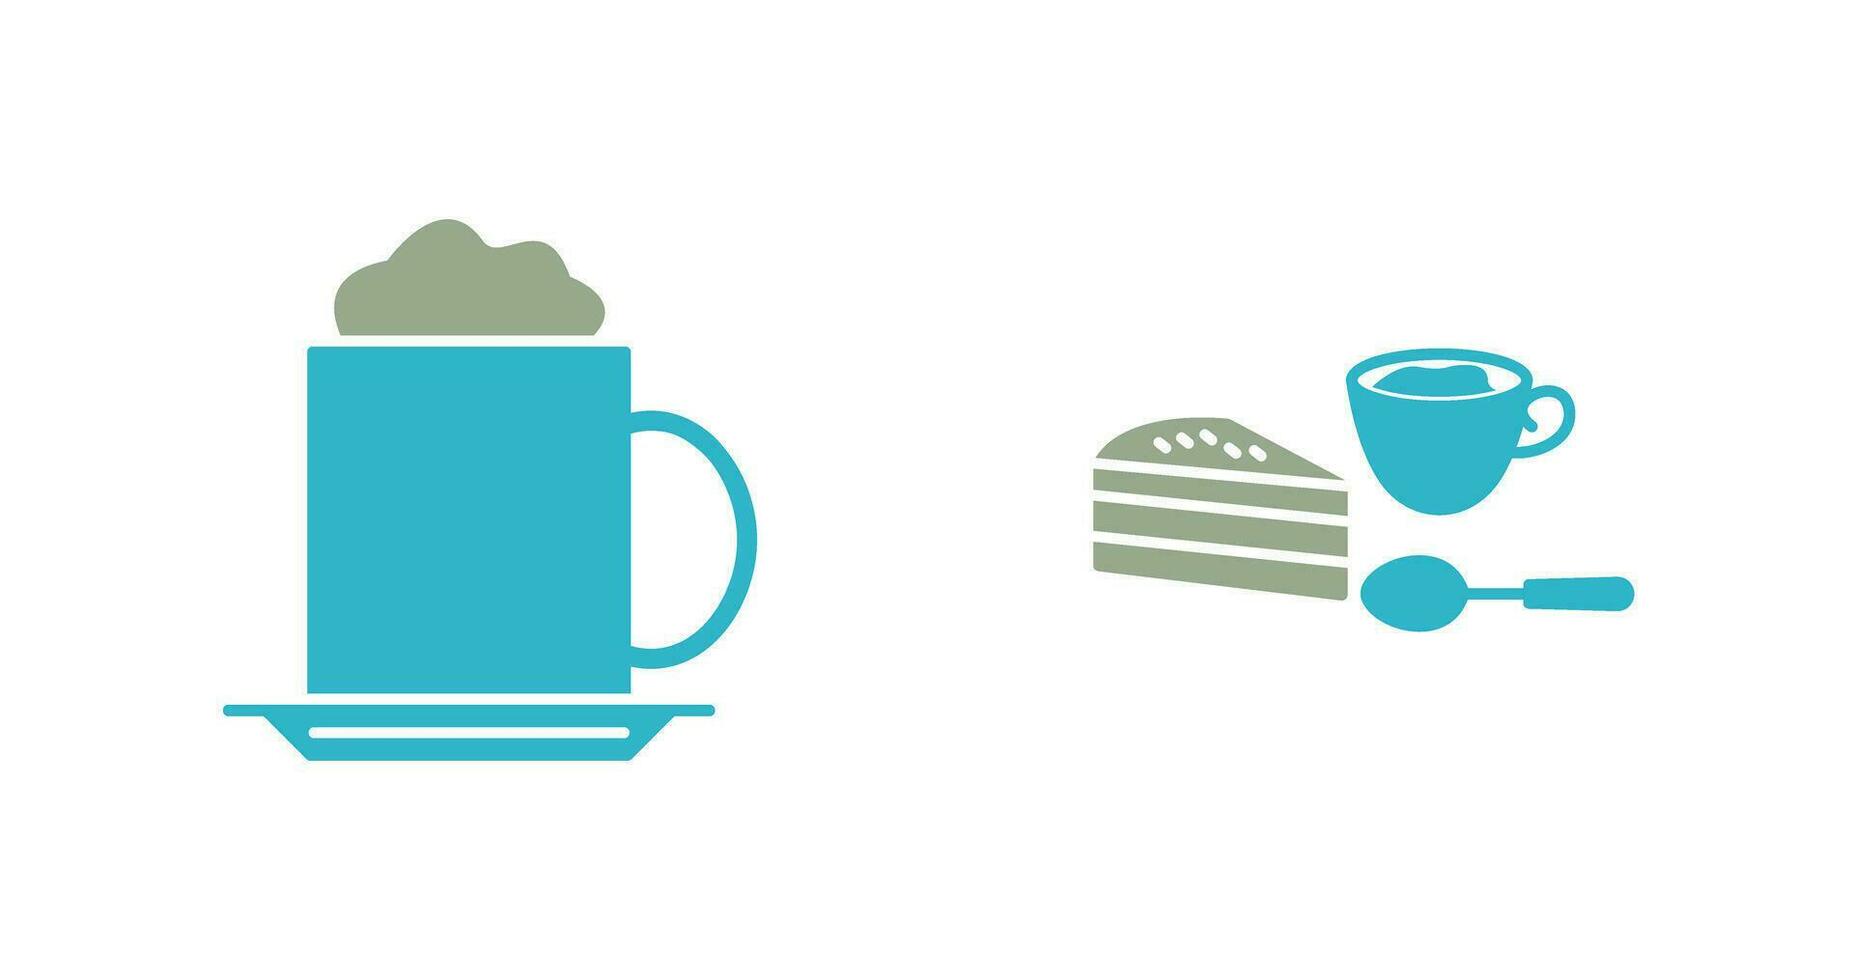 capppucino and coffee served  Icon vector